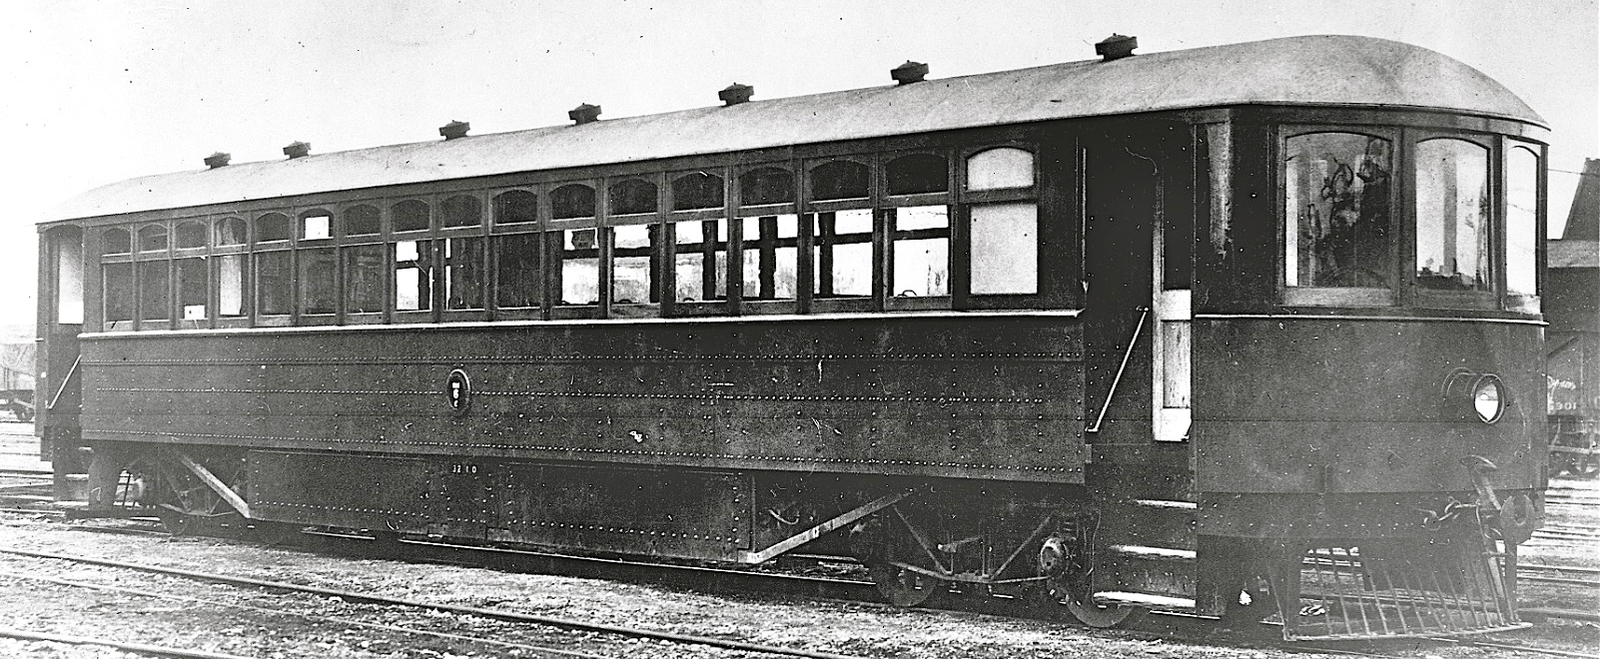 RM-6 in a photo from 1926